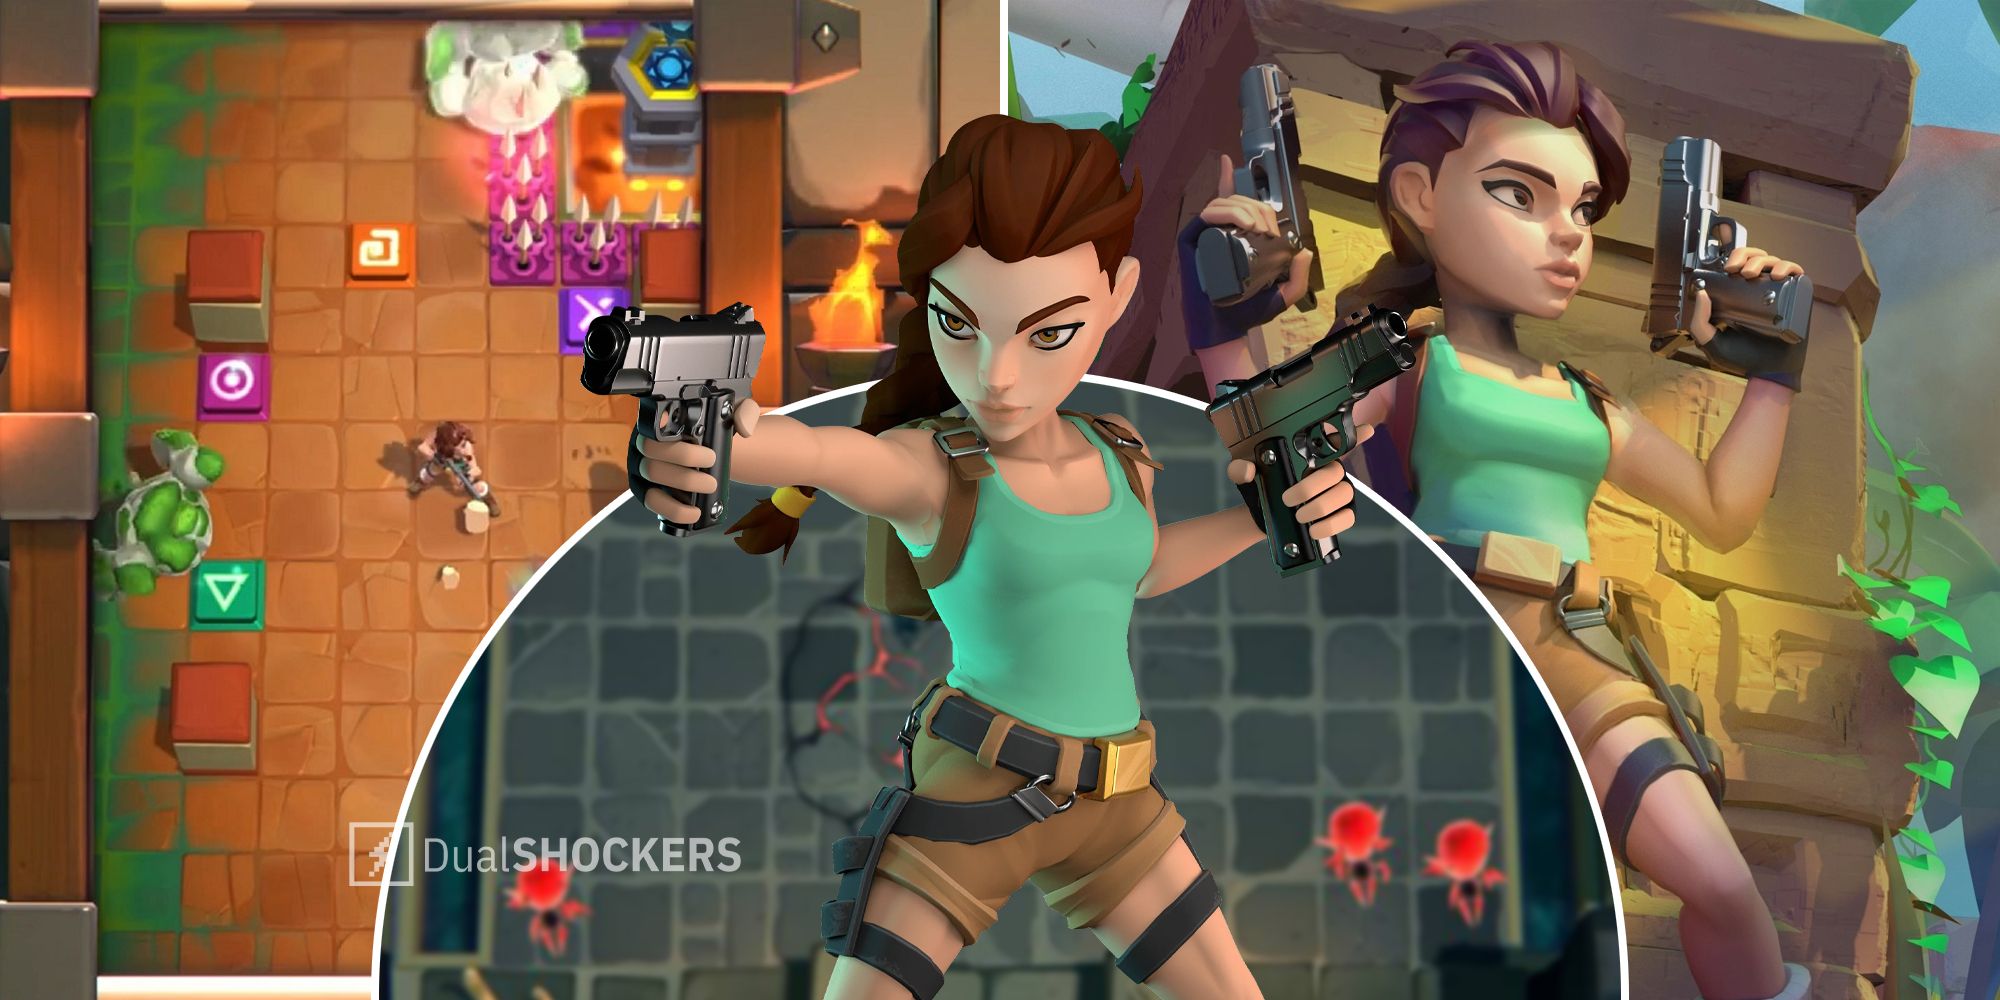 Hands-on: Tomb Raider Reloaded is typical mobile fare but Netflix could be  its saviour